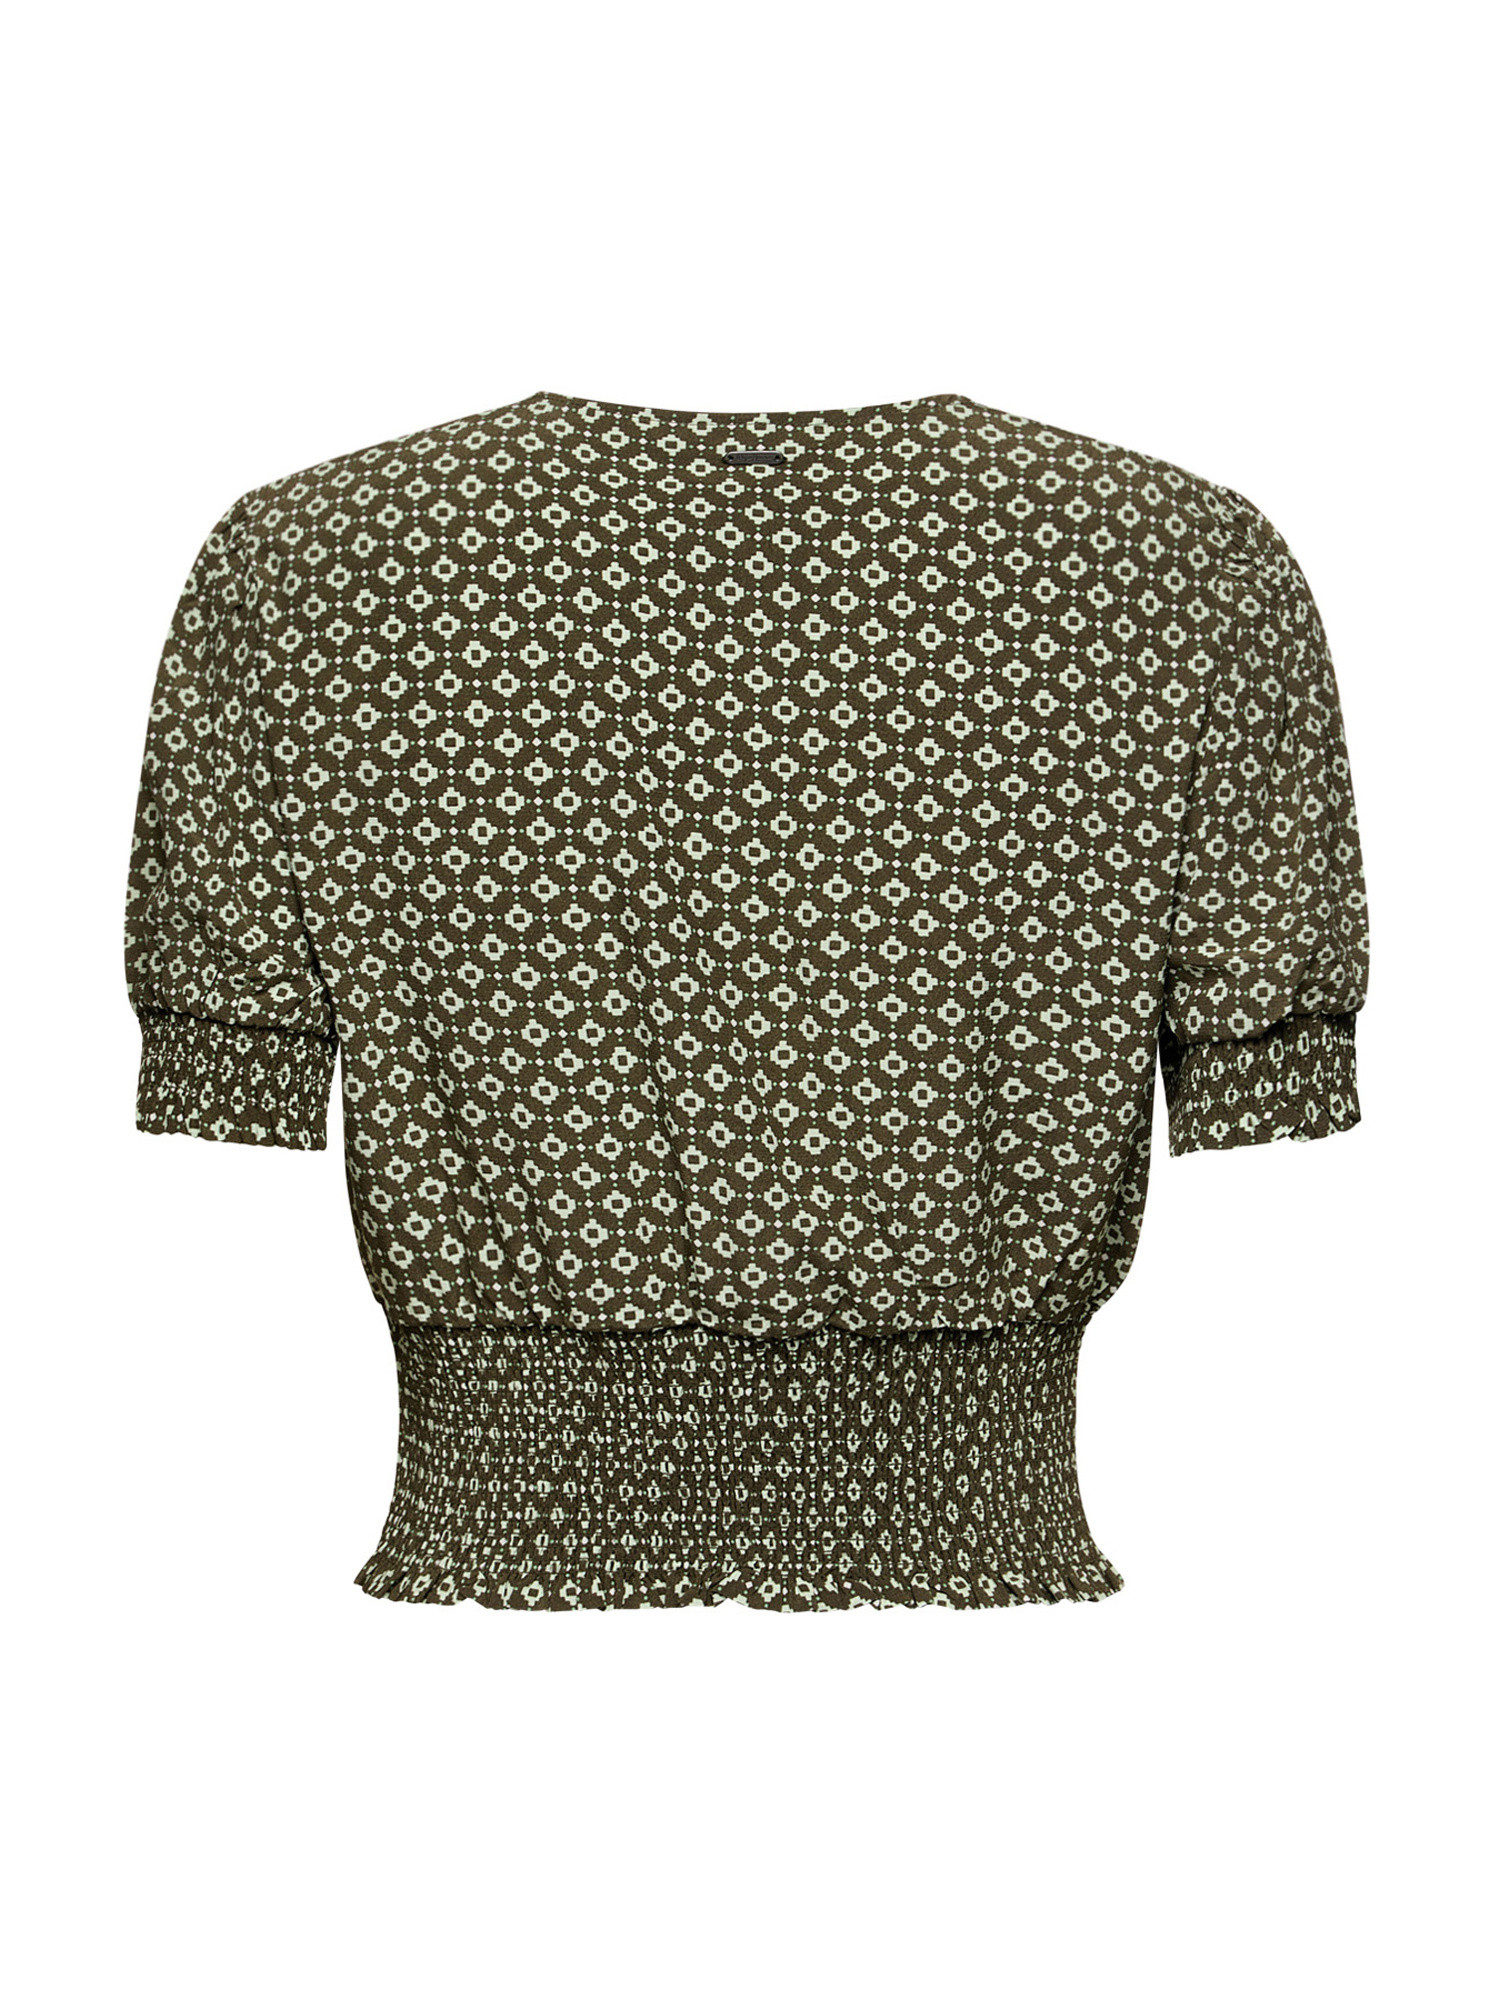 Pepe Jeans - Blusa con stampa geometrica, Verde oliva, large image number 1